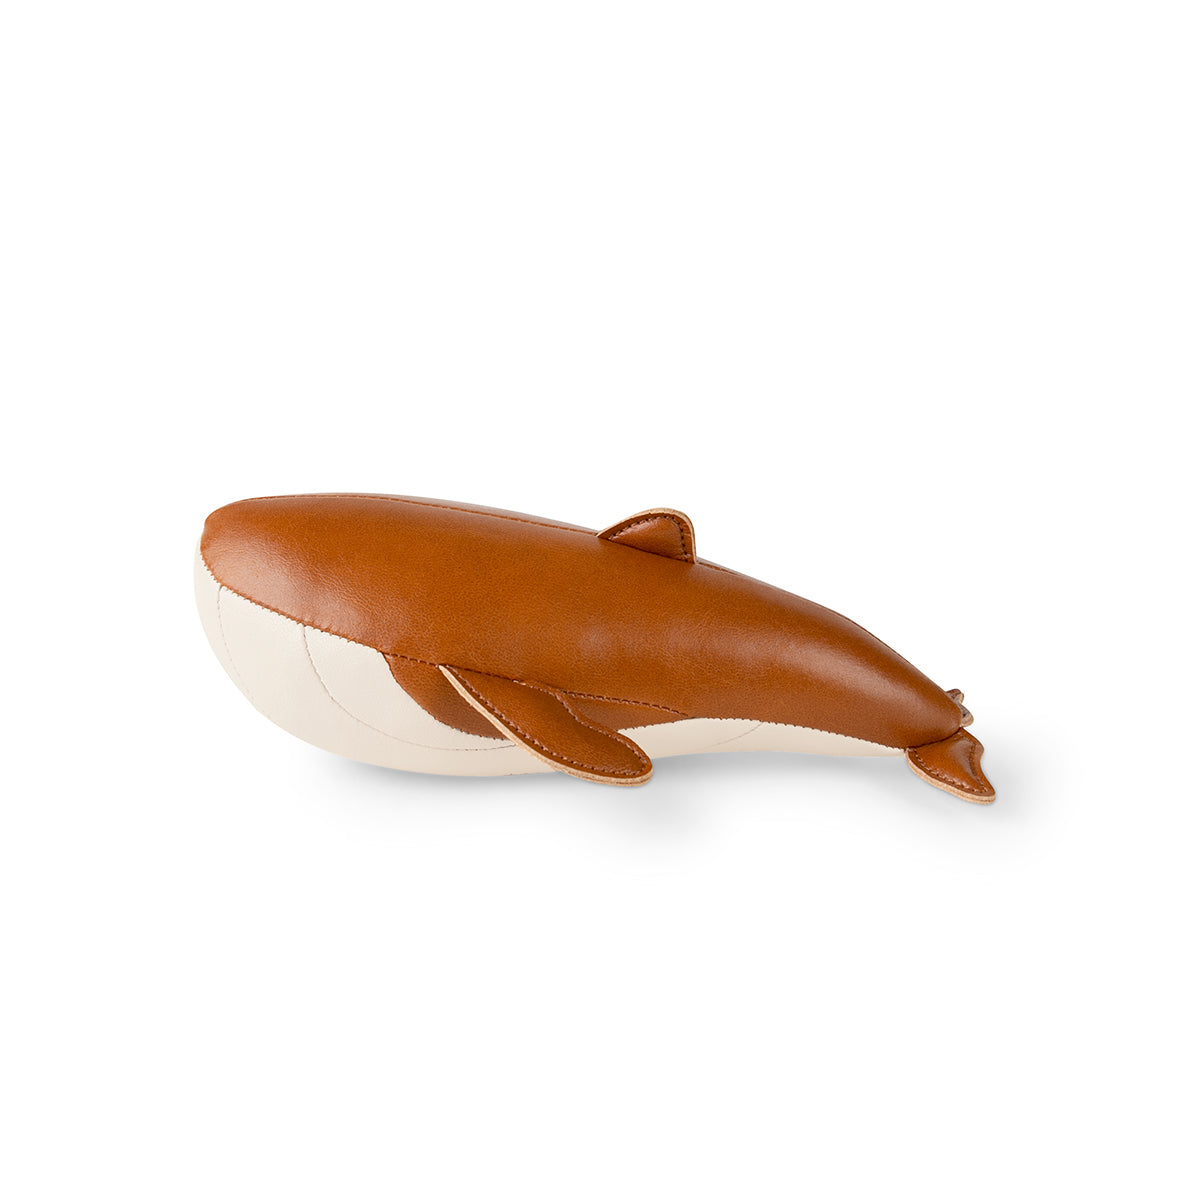 Zuny Paperweight Whale Wave Tan